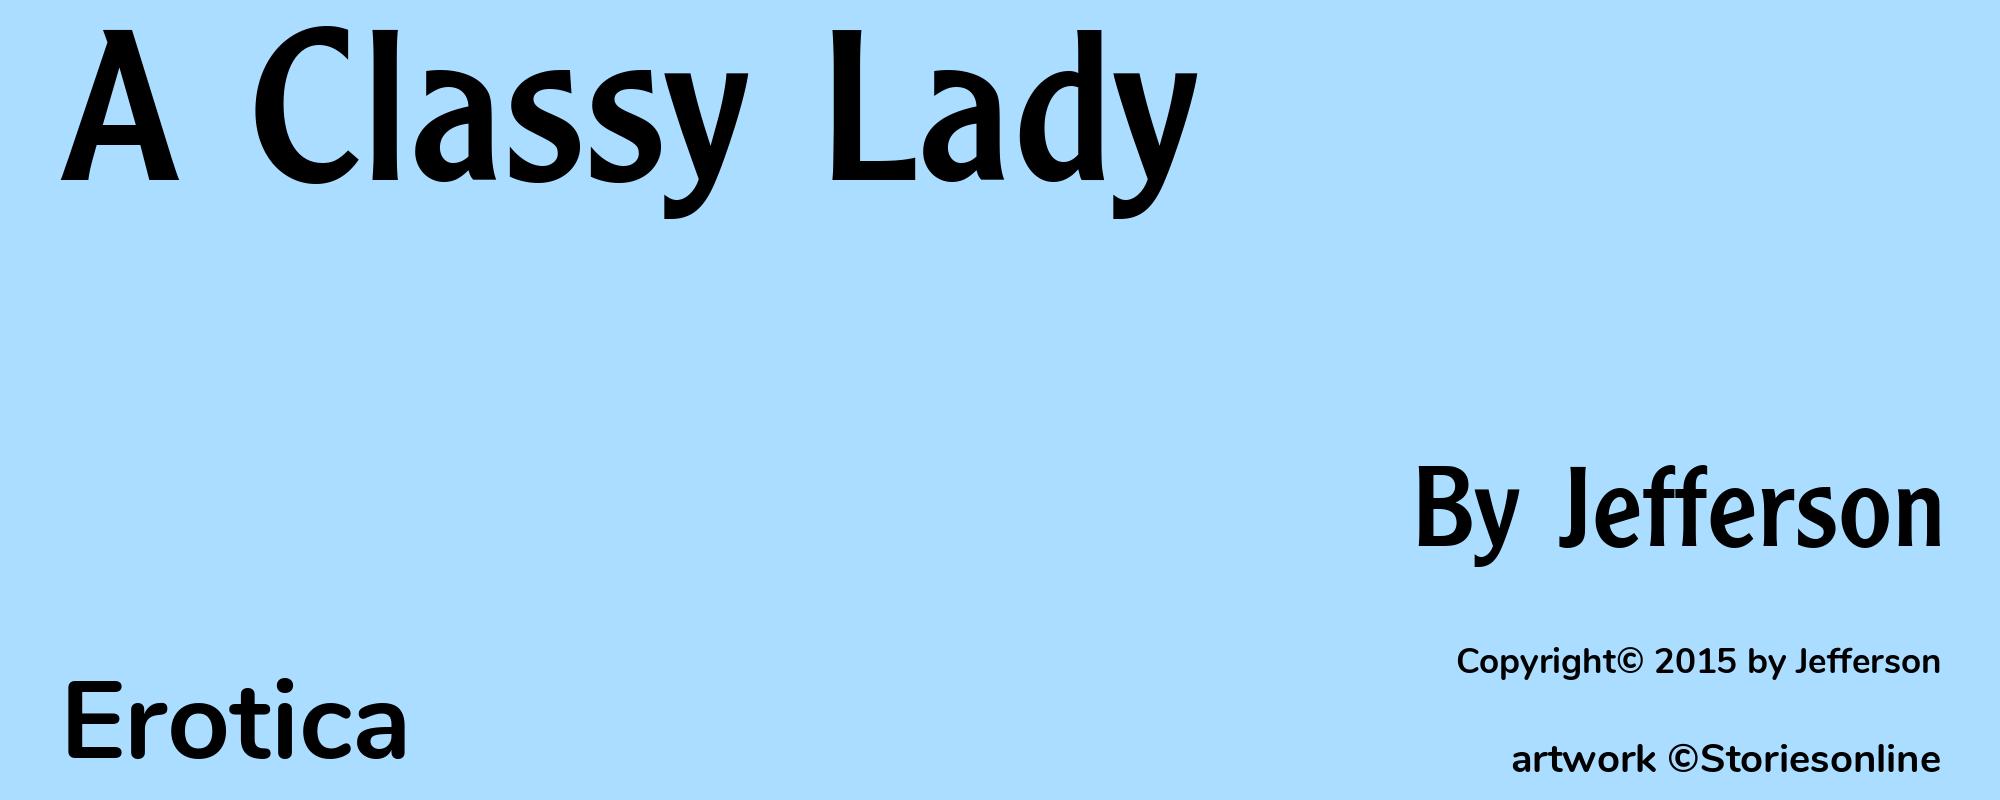 A Classy Lady - Cover